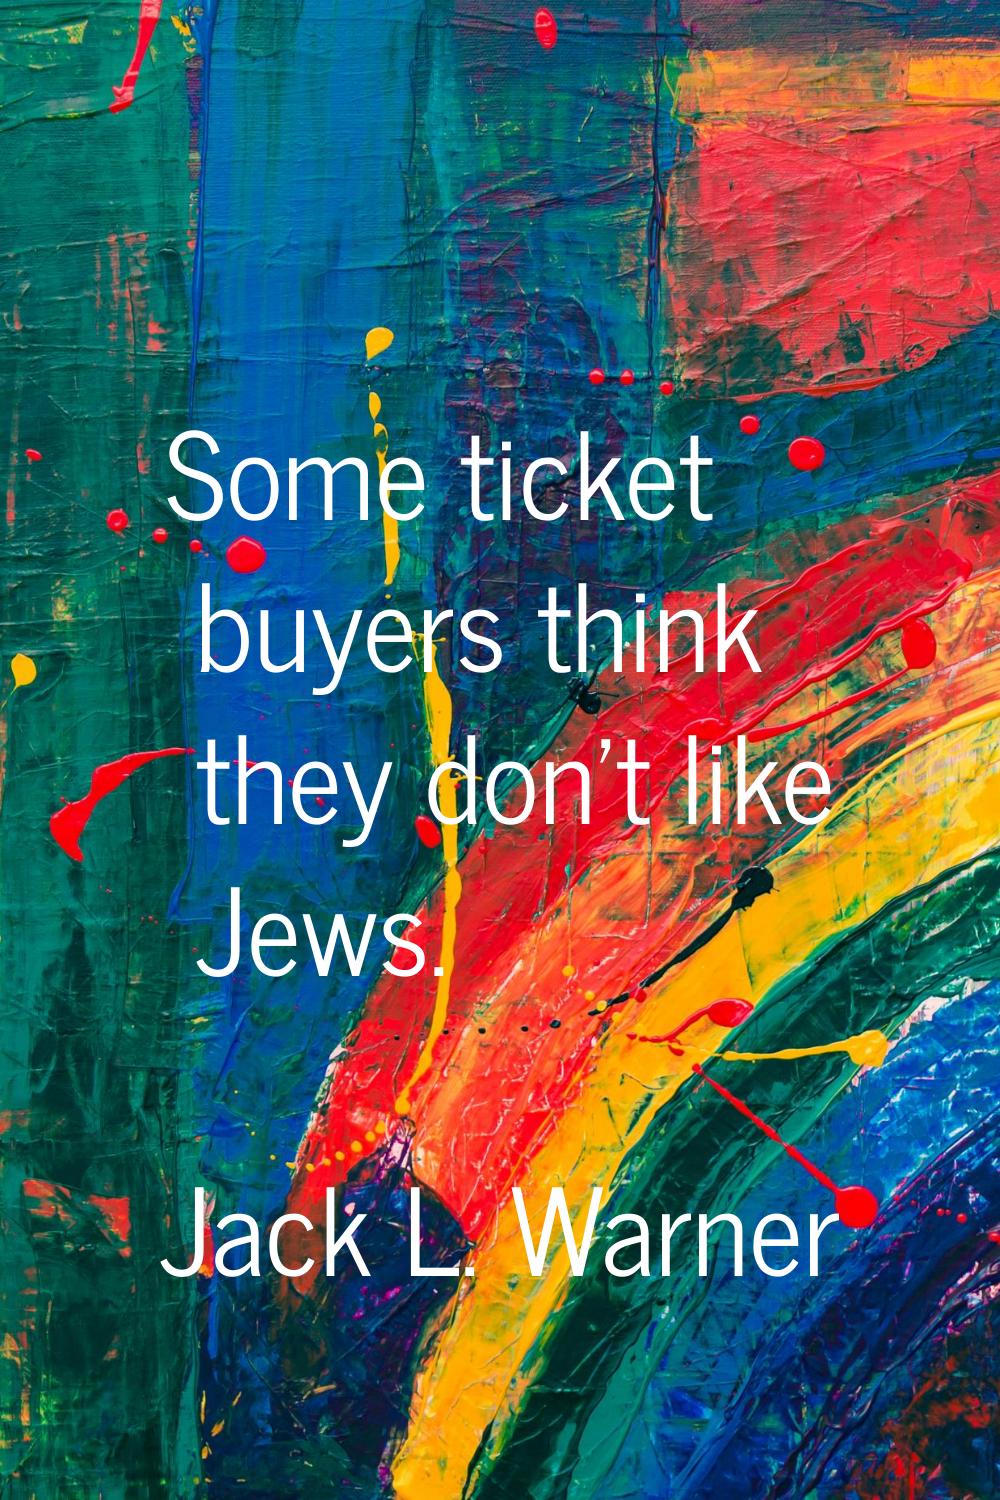 Some ticket buyers think they don't like Jews.